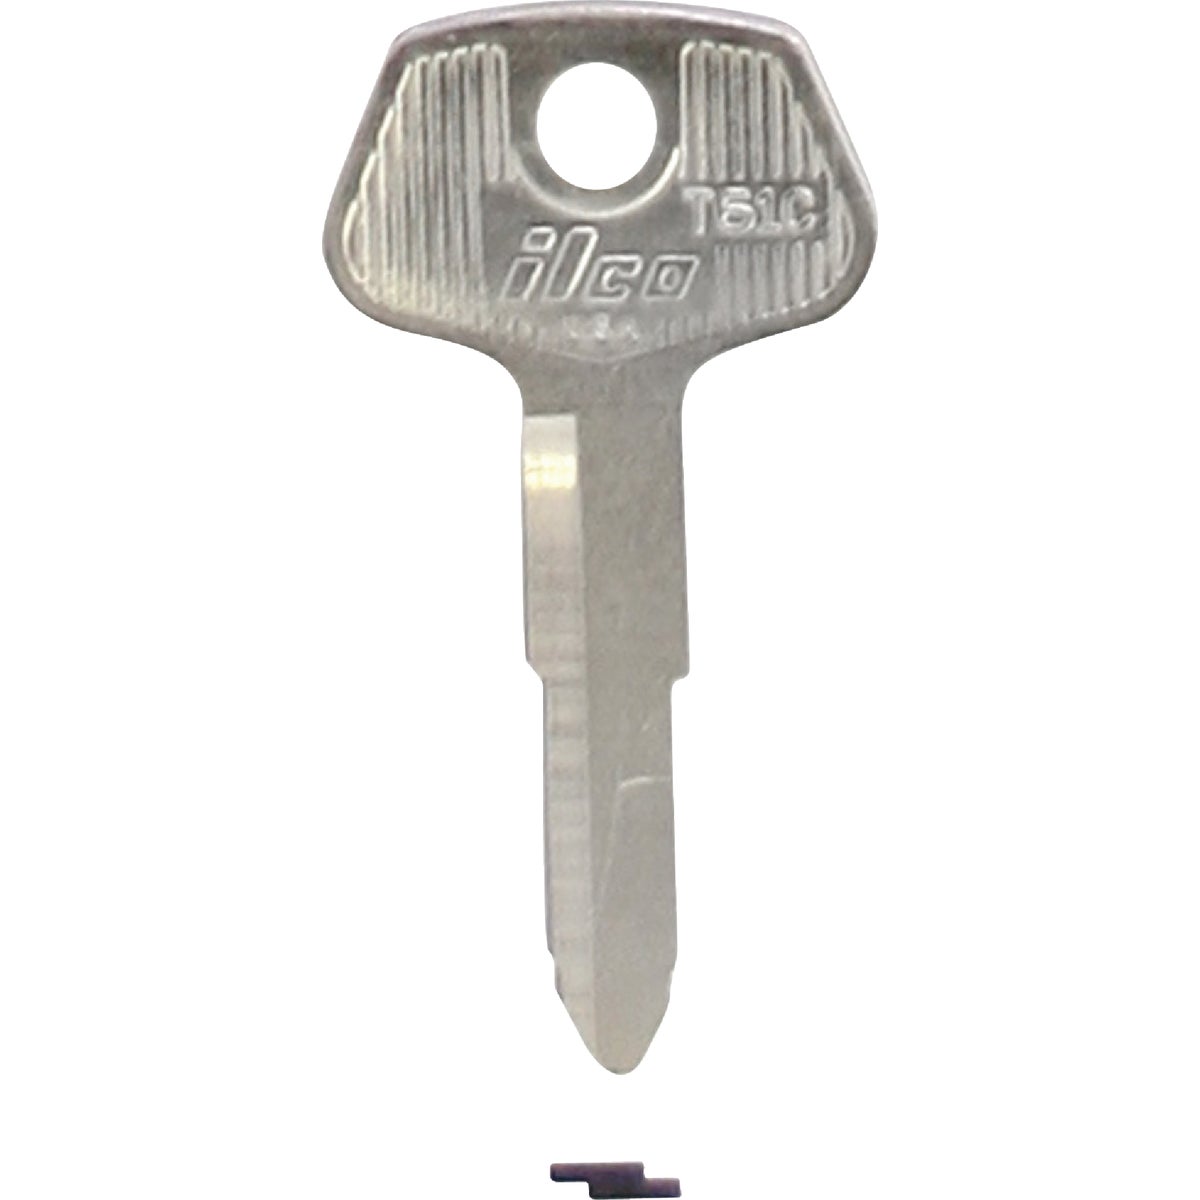 ILCO Toyota Nickel Plated Automotive Key, T61C (10-Pack)